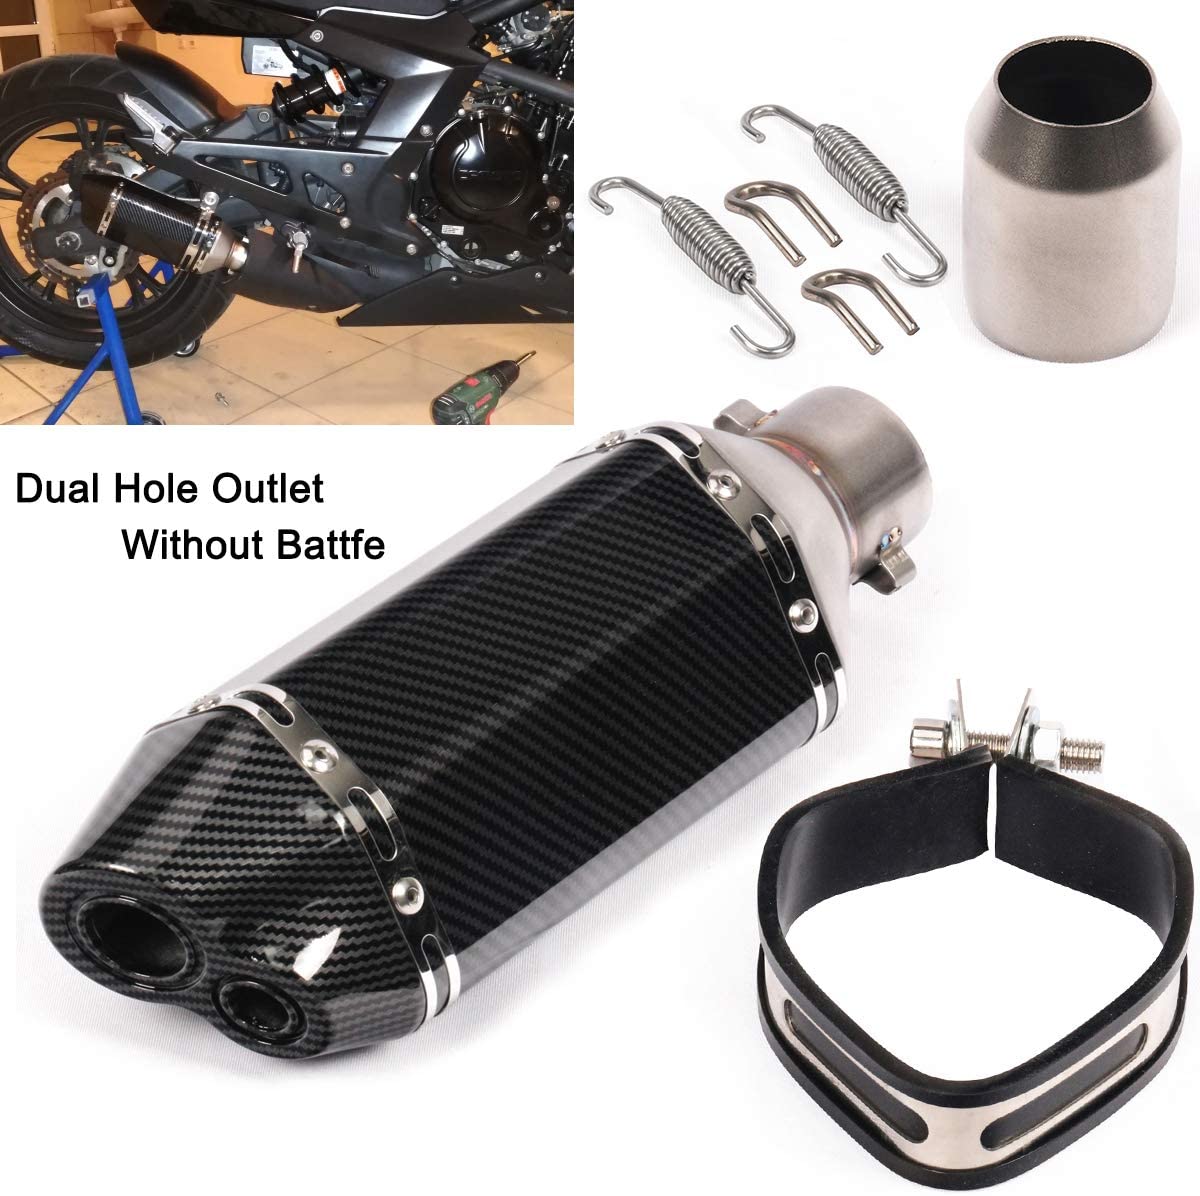 Buy ISTUNT Motorcycle Dual Outlet 12.2 Universal Exhaust Muffler Carbon  Pattern Stainless Steel Slip on 2 Inlet with 38 to 51mm Welding Adaptor NO  DB Killer Silencer Online in Indonesia. B086XC4NVJ